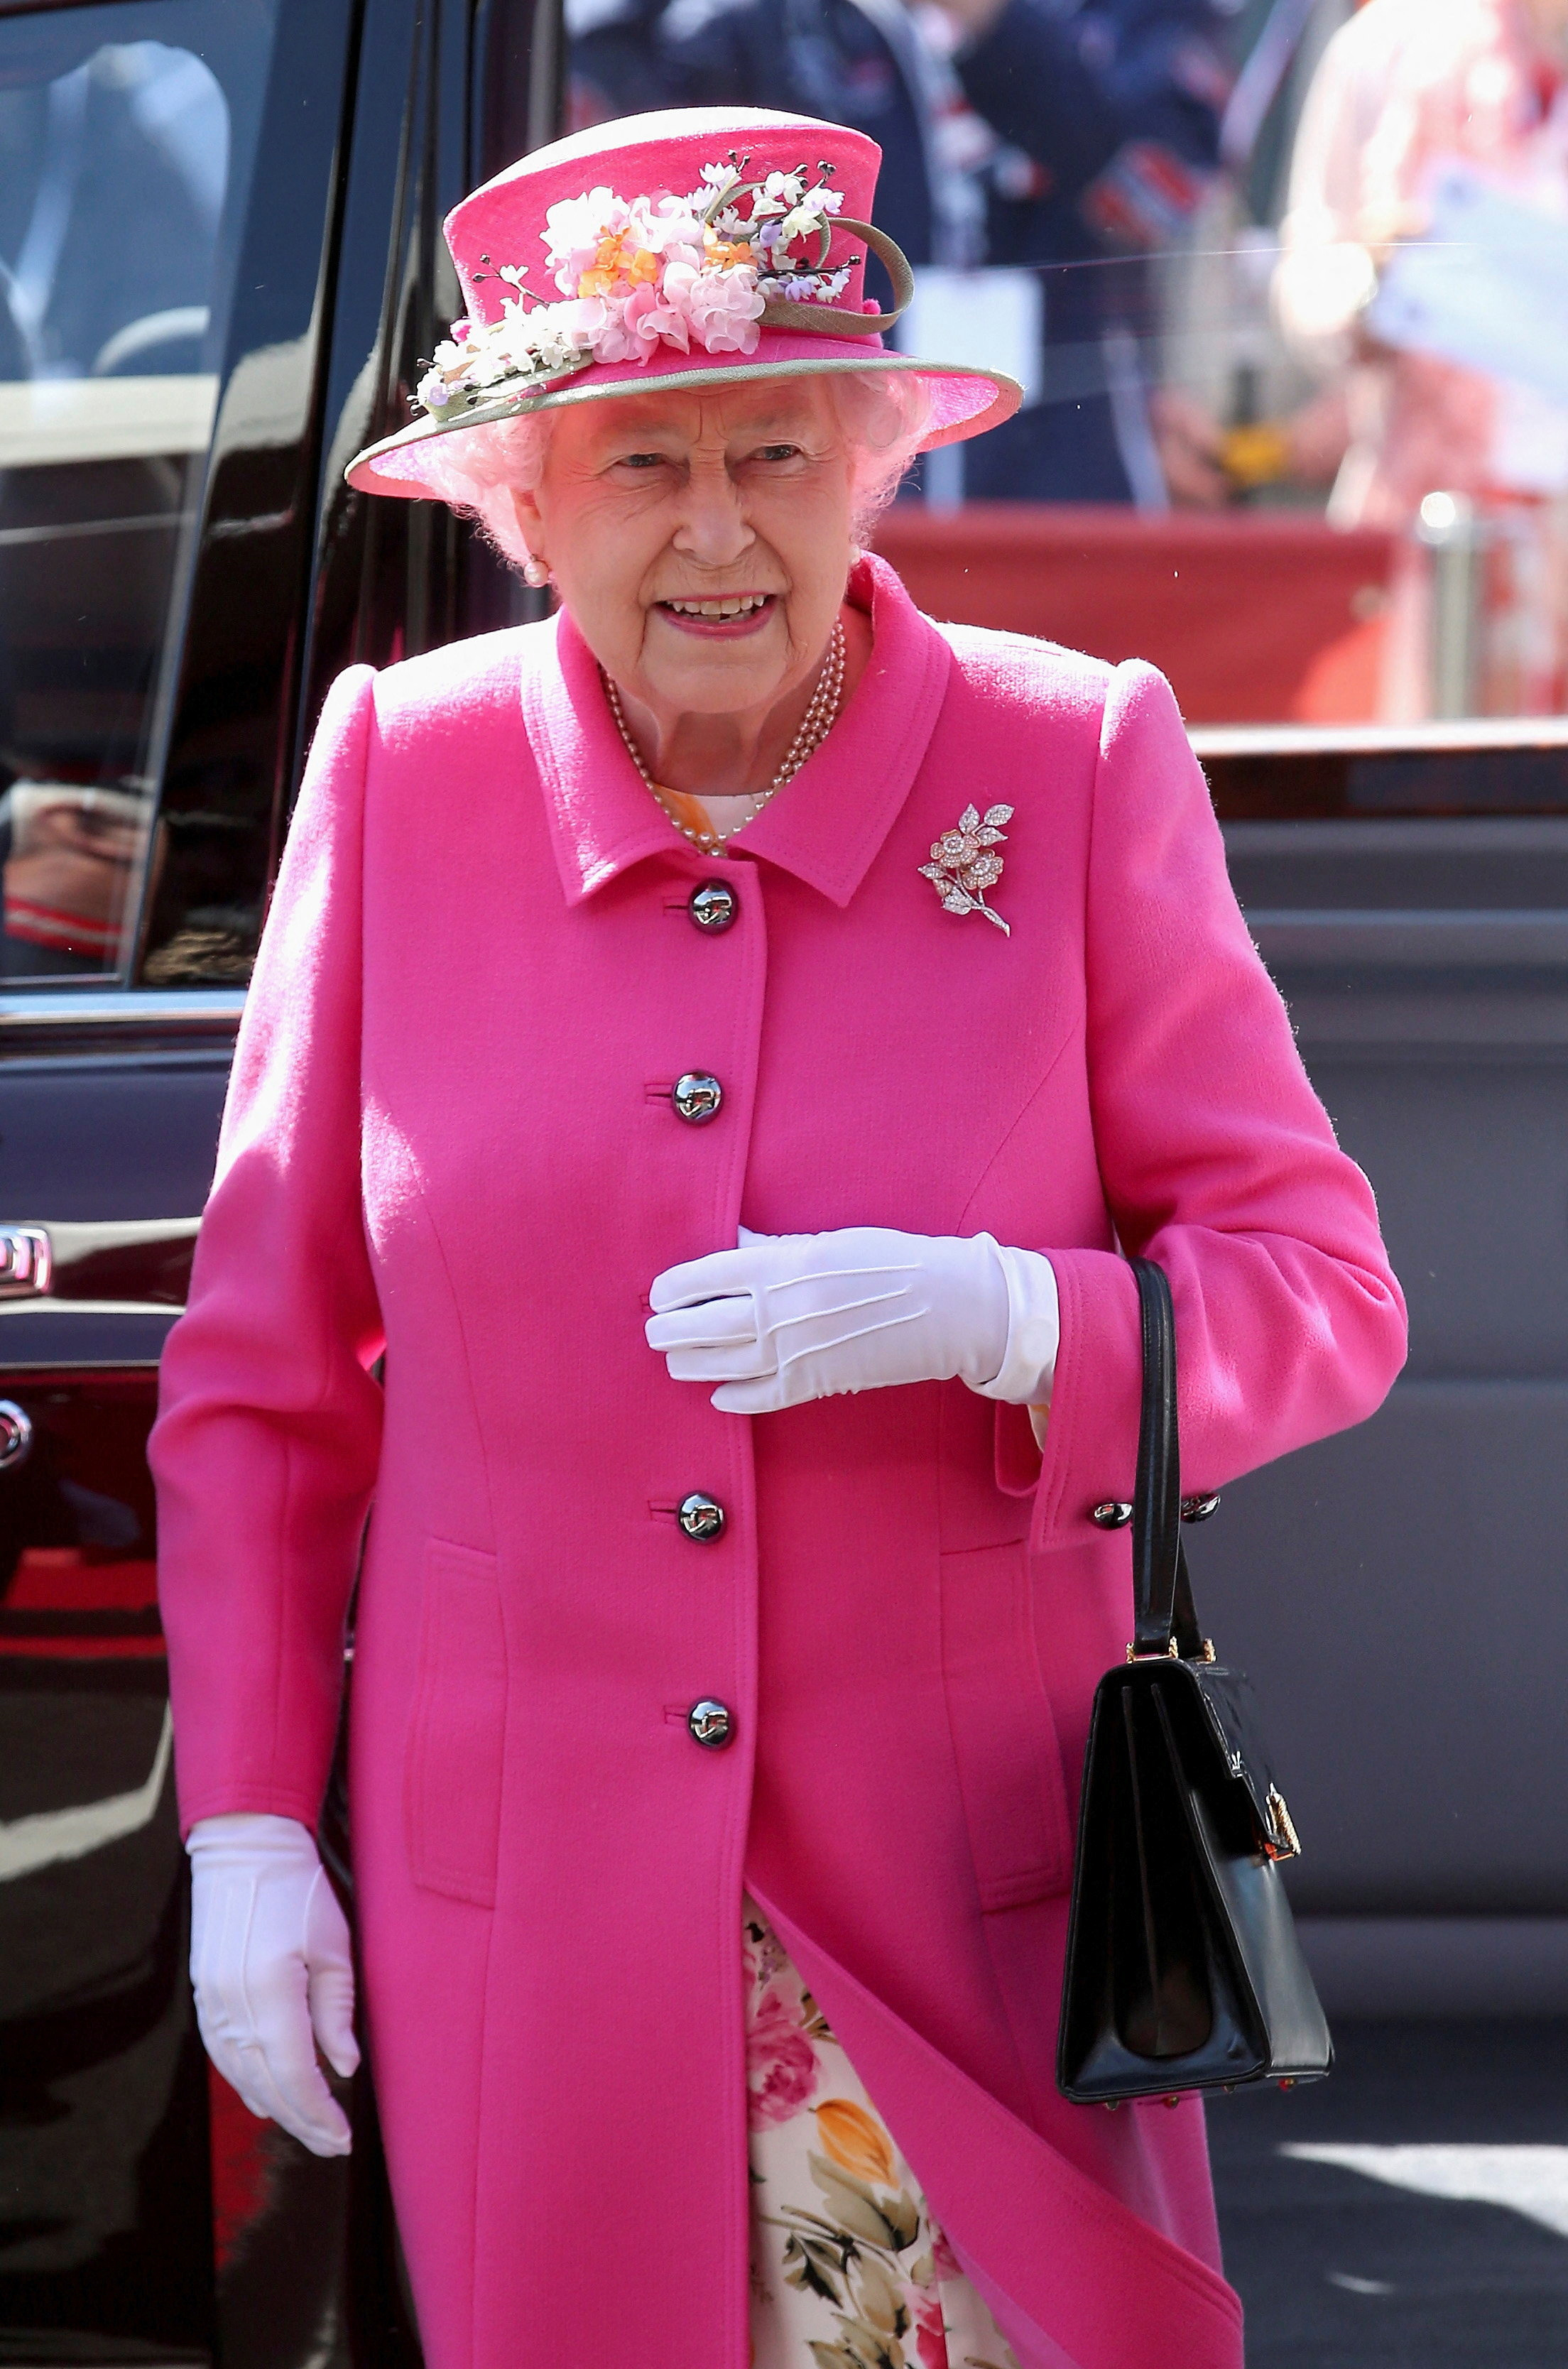 British monarchy's fashion mantle passes to younger generation | Reuters